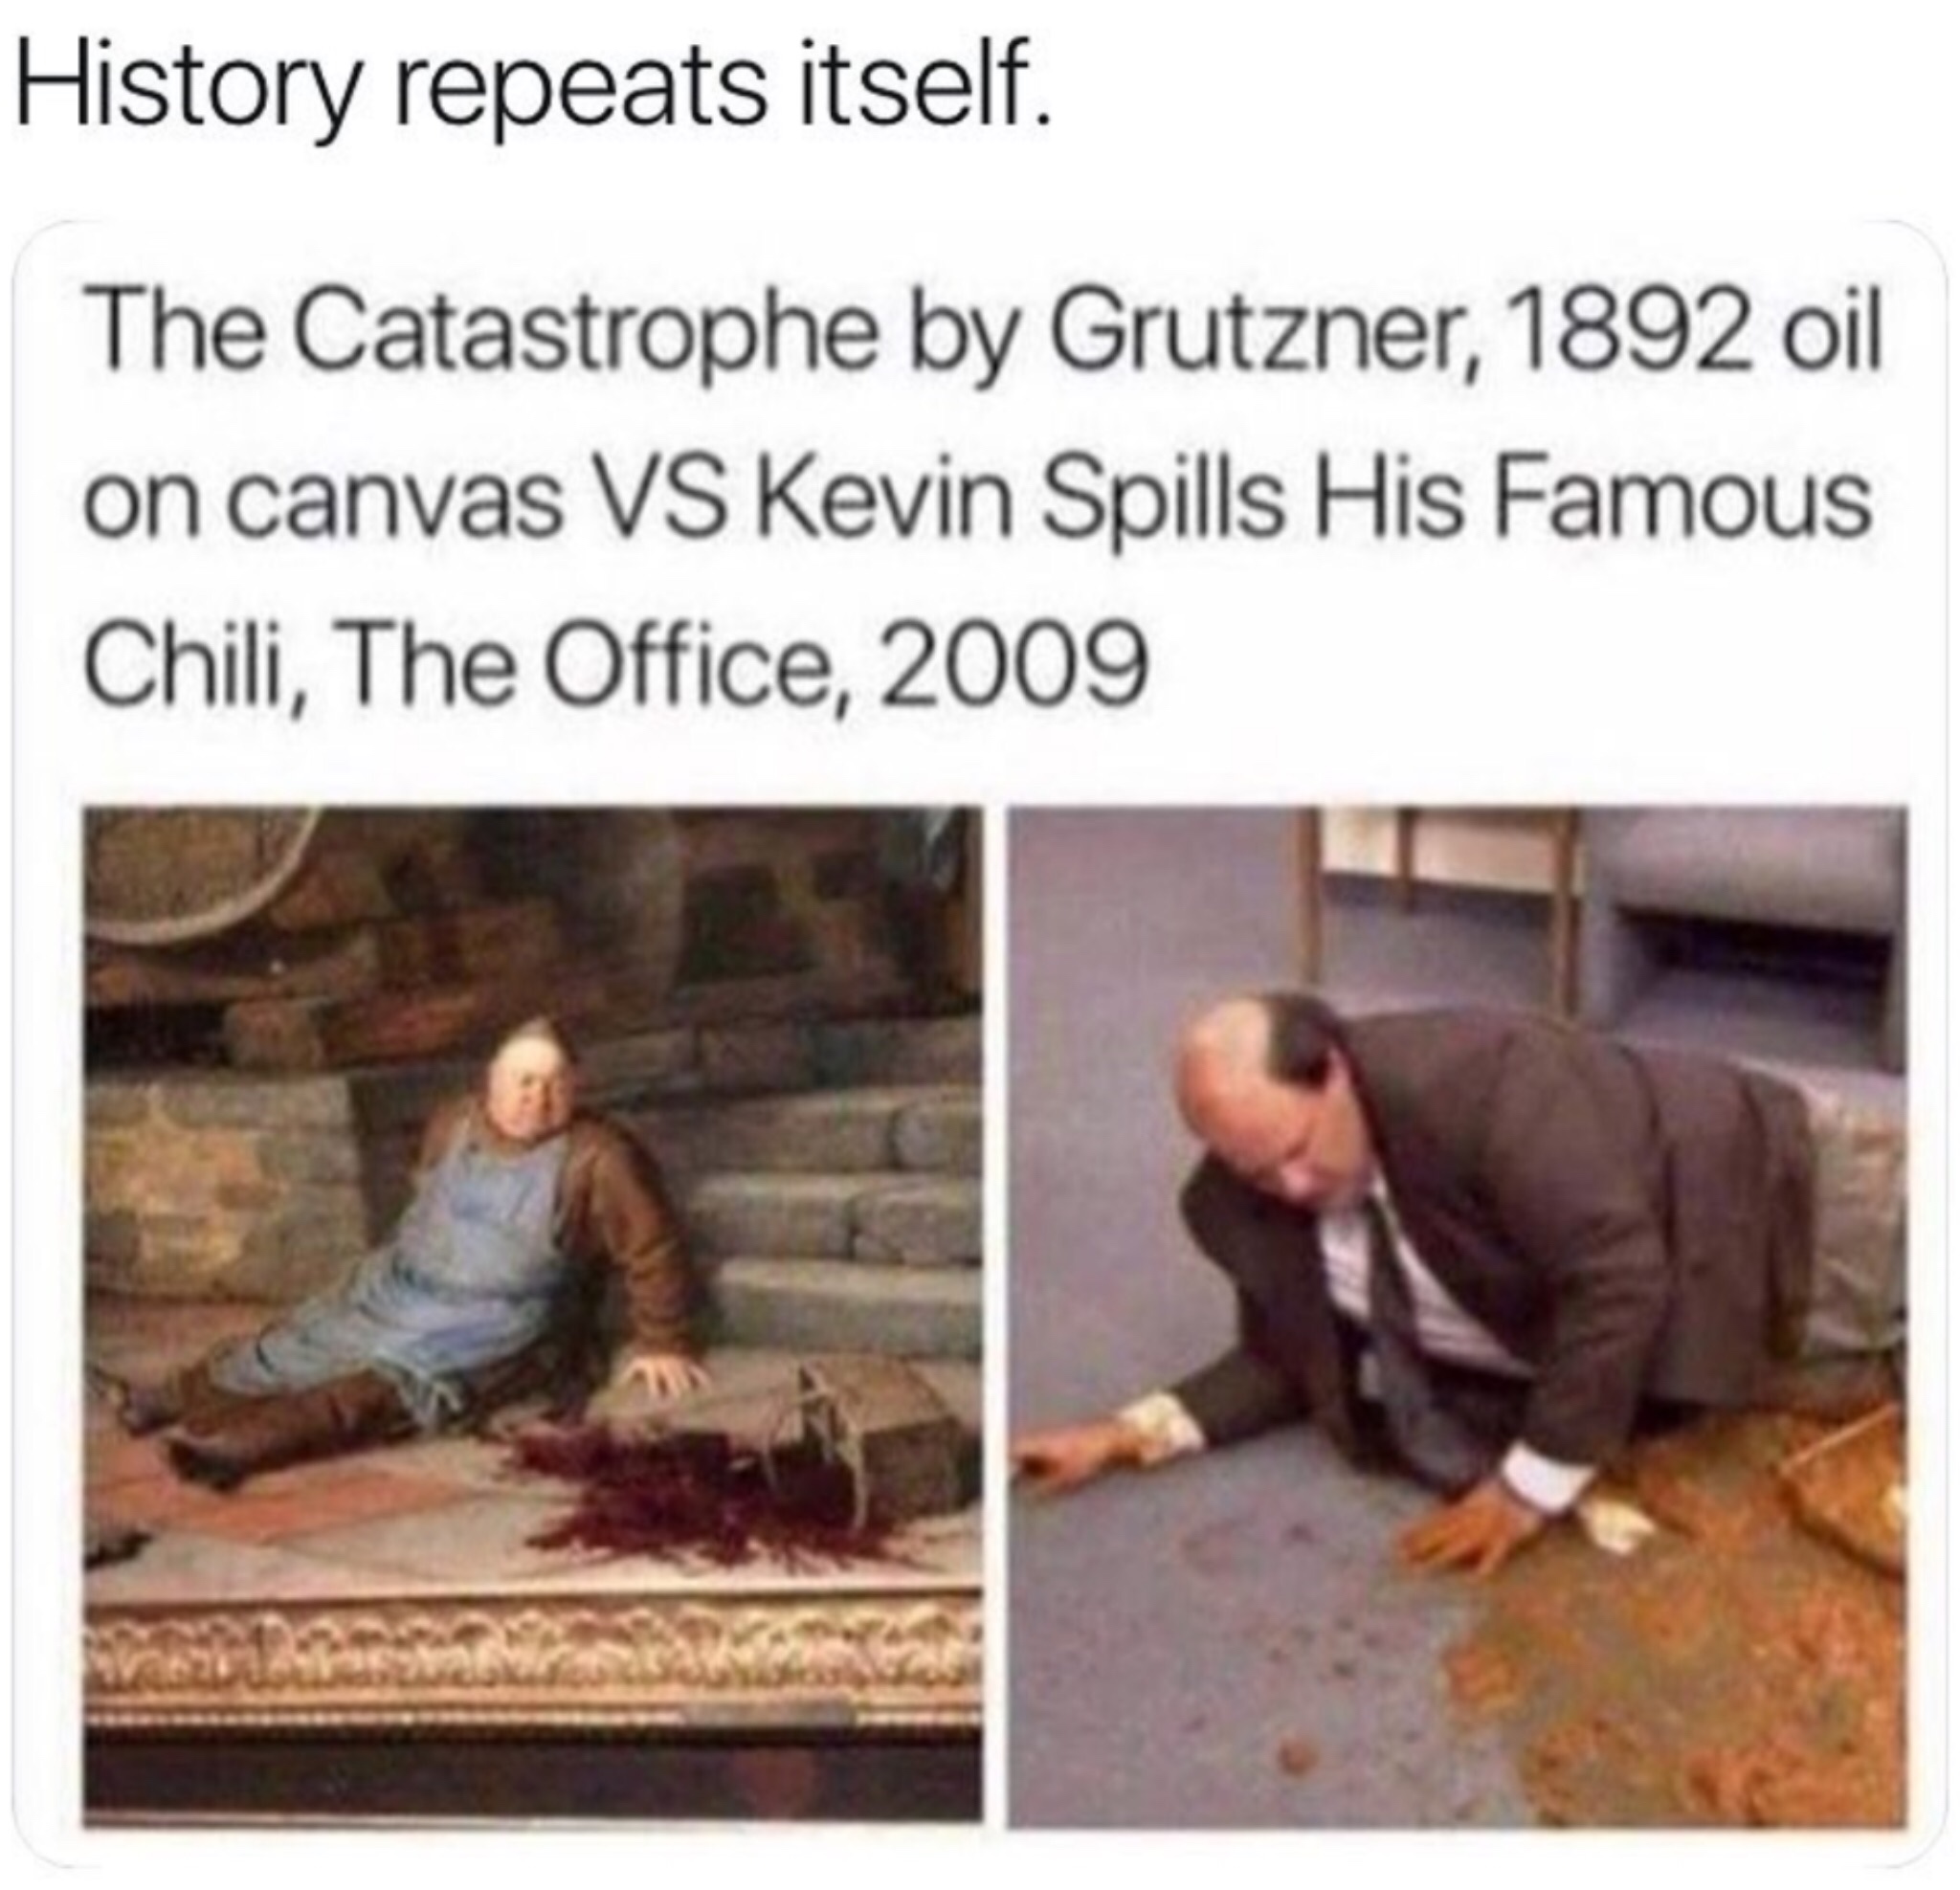 kevin's chilli meme - History repeats itself. The Catastrophe by Grutzner, 1892 oil on canvas Vs Kevin Spills His Famous Chili, The Office, 2009